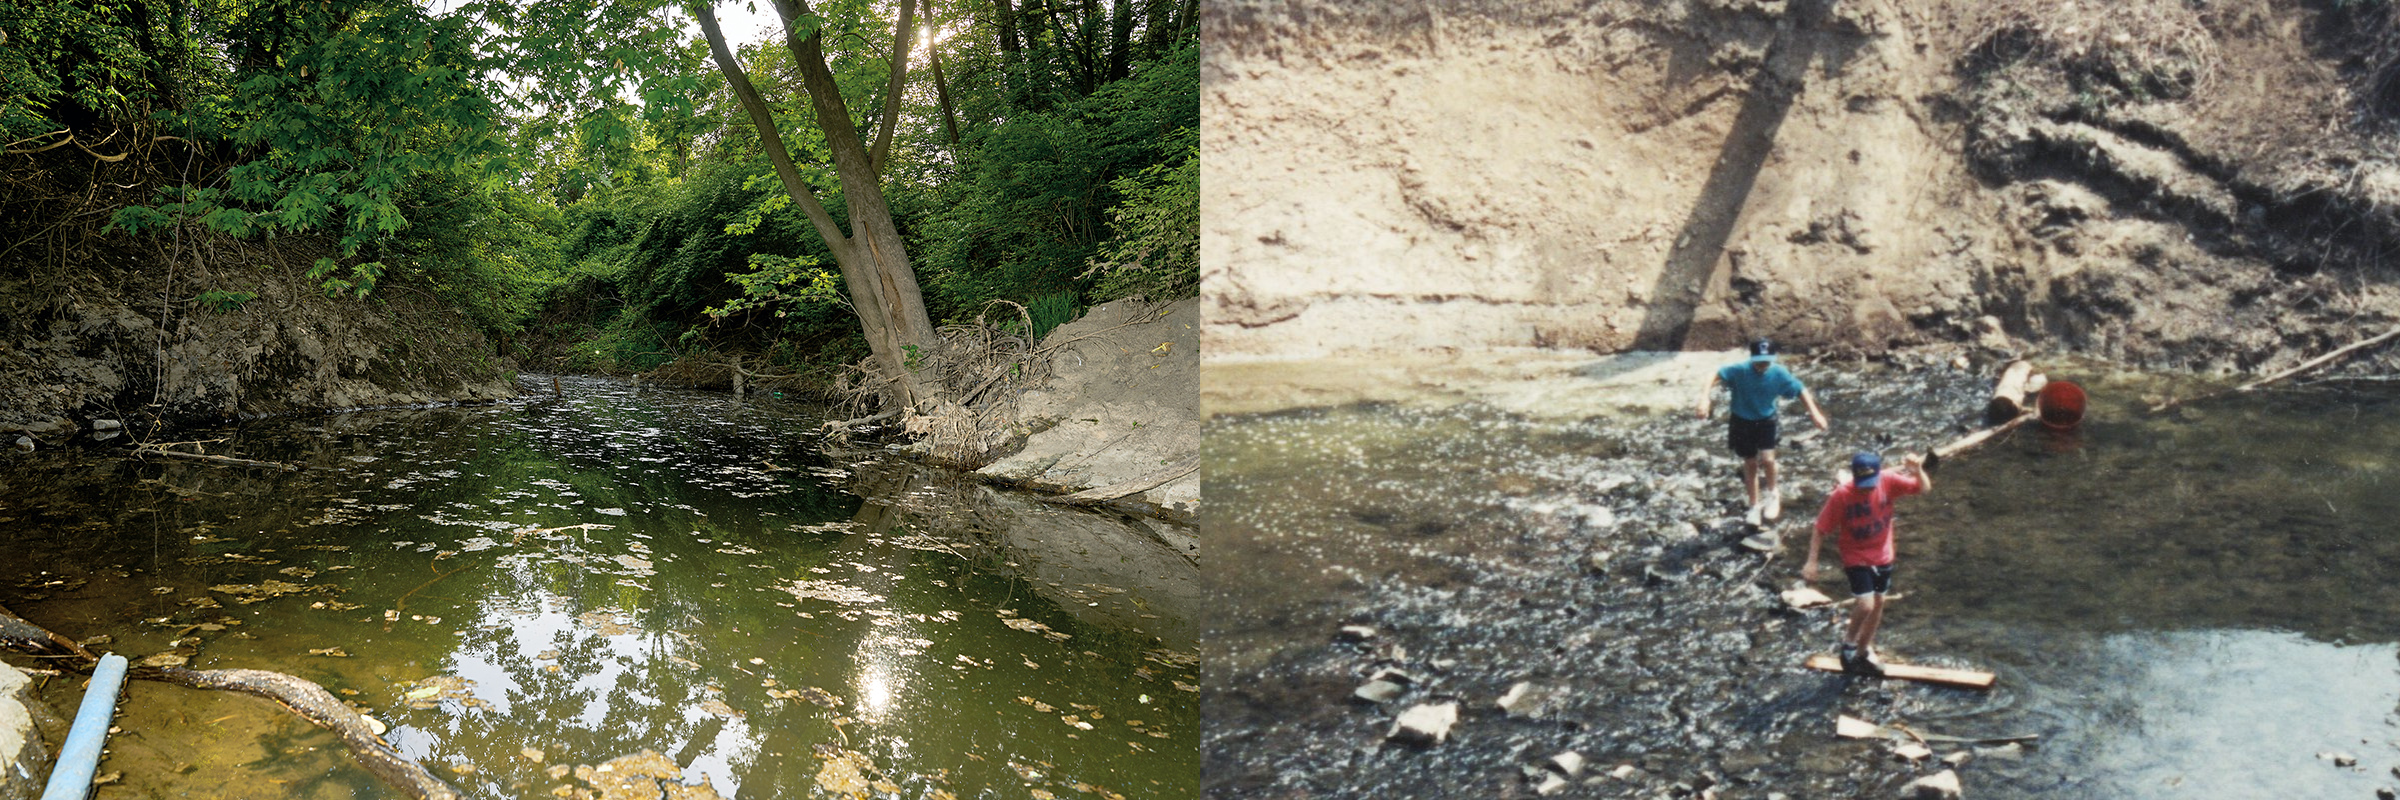 Were you exposed to radioactive waste along Coldwater Creek? A